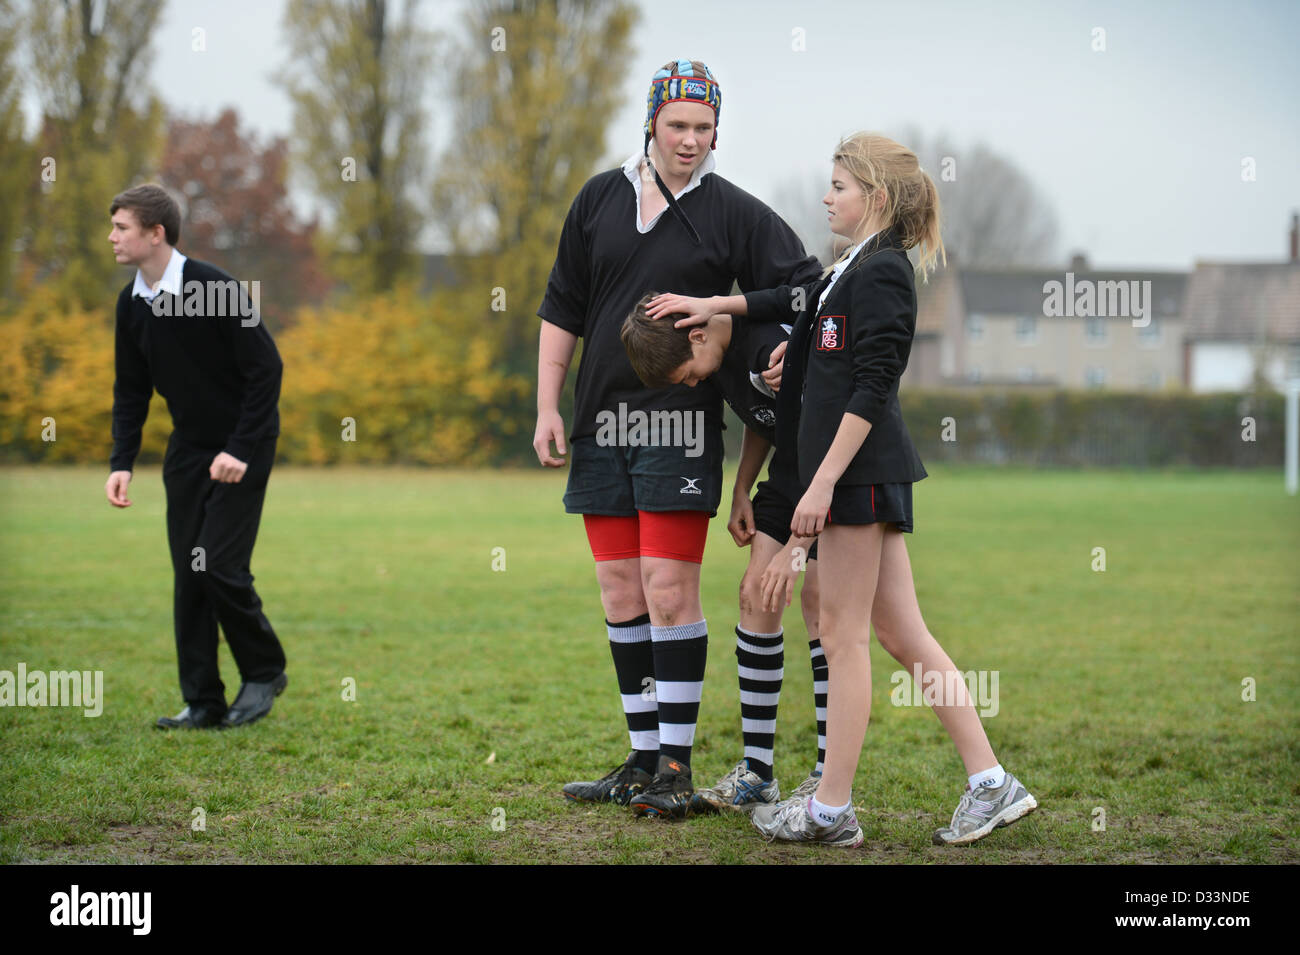 A girl joins a group of boys for a game of rugby at Pates Grammar School in Cheltenham, Gloucestershire UK Stock Photo